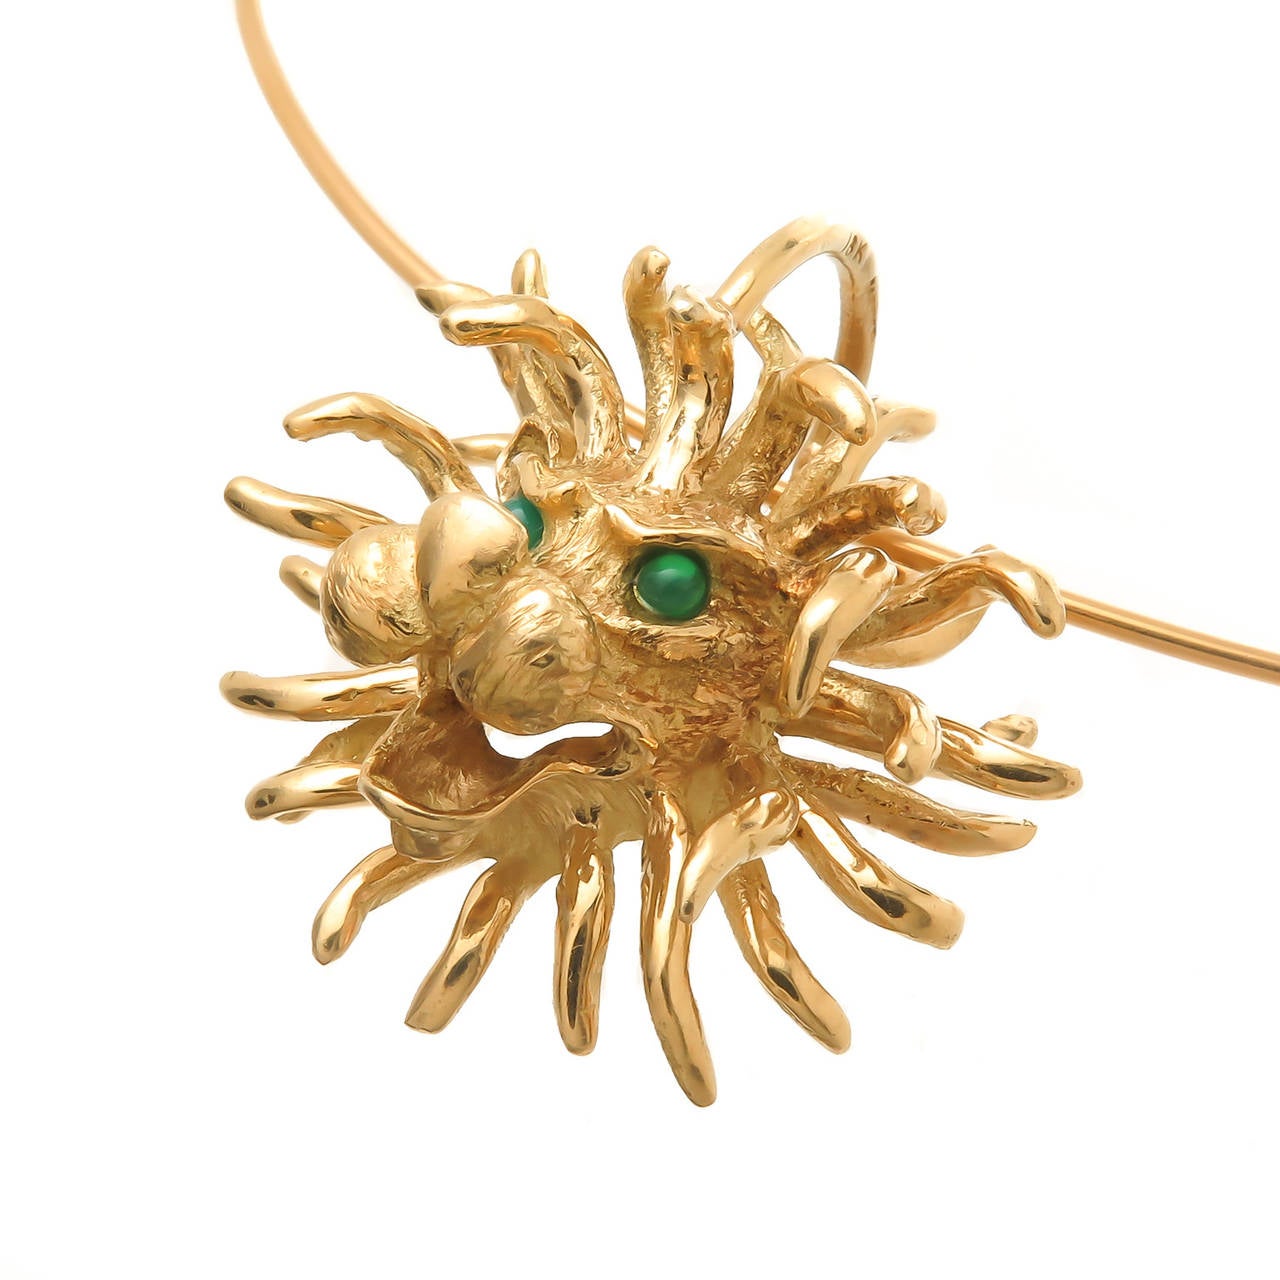 Circa 1970 Cartier 18K Yellow Gold Lion Pendant on an 18K Yellow Gold Cartier wire torque, the pendant is heavy and is nicely detailed and textured and features Green Chrysophrase Eyes. the 2 MM thick Wire measures approximately 16 1/4 inch. In a